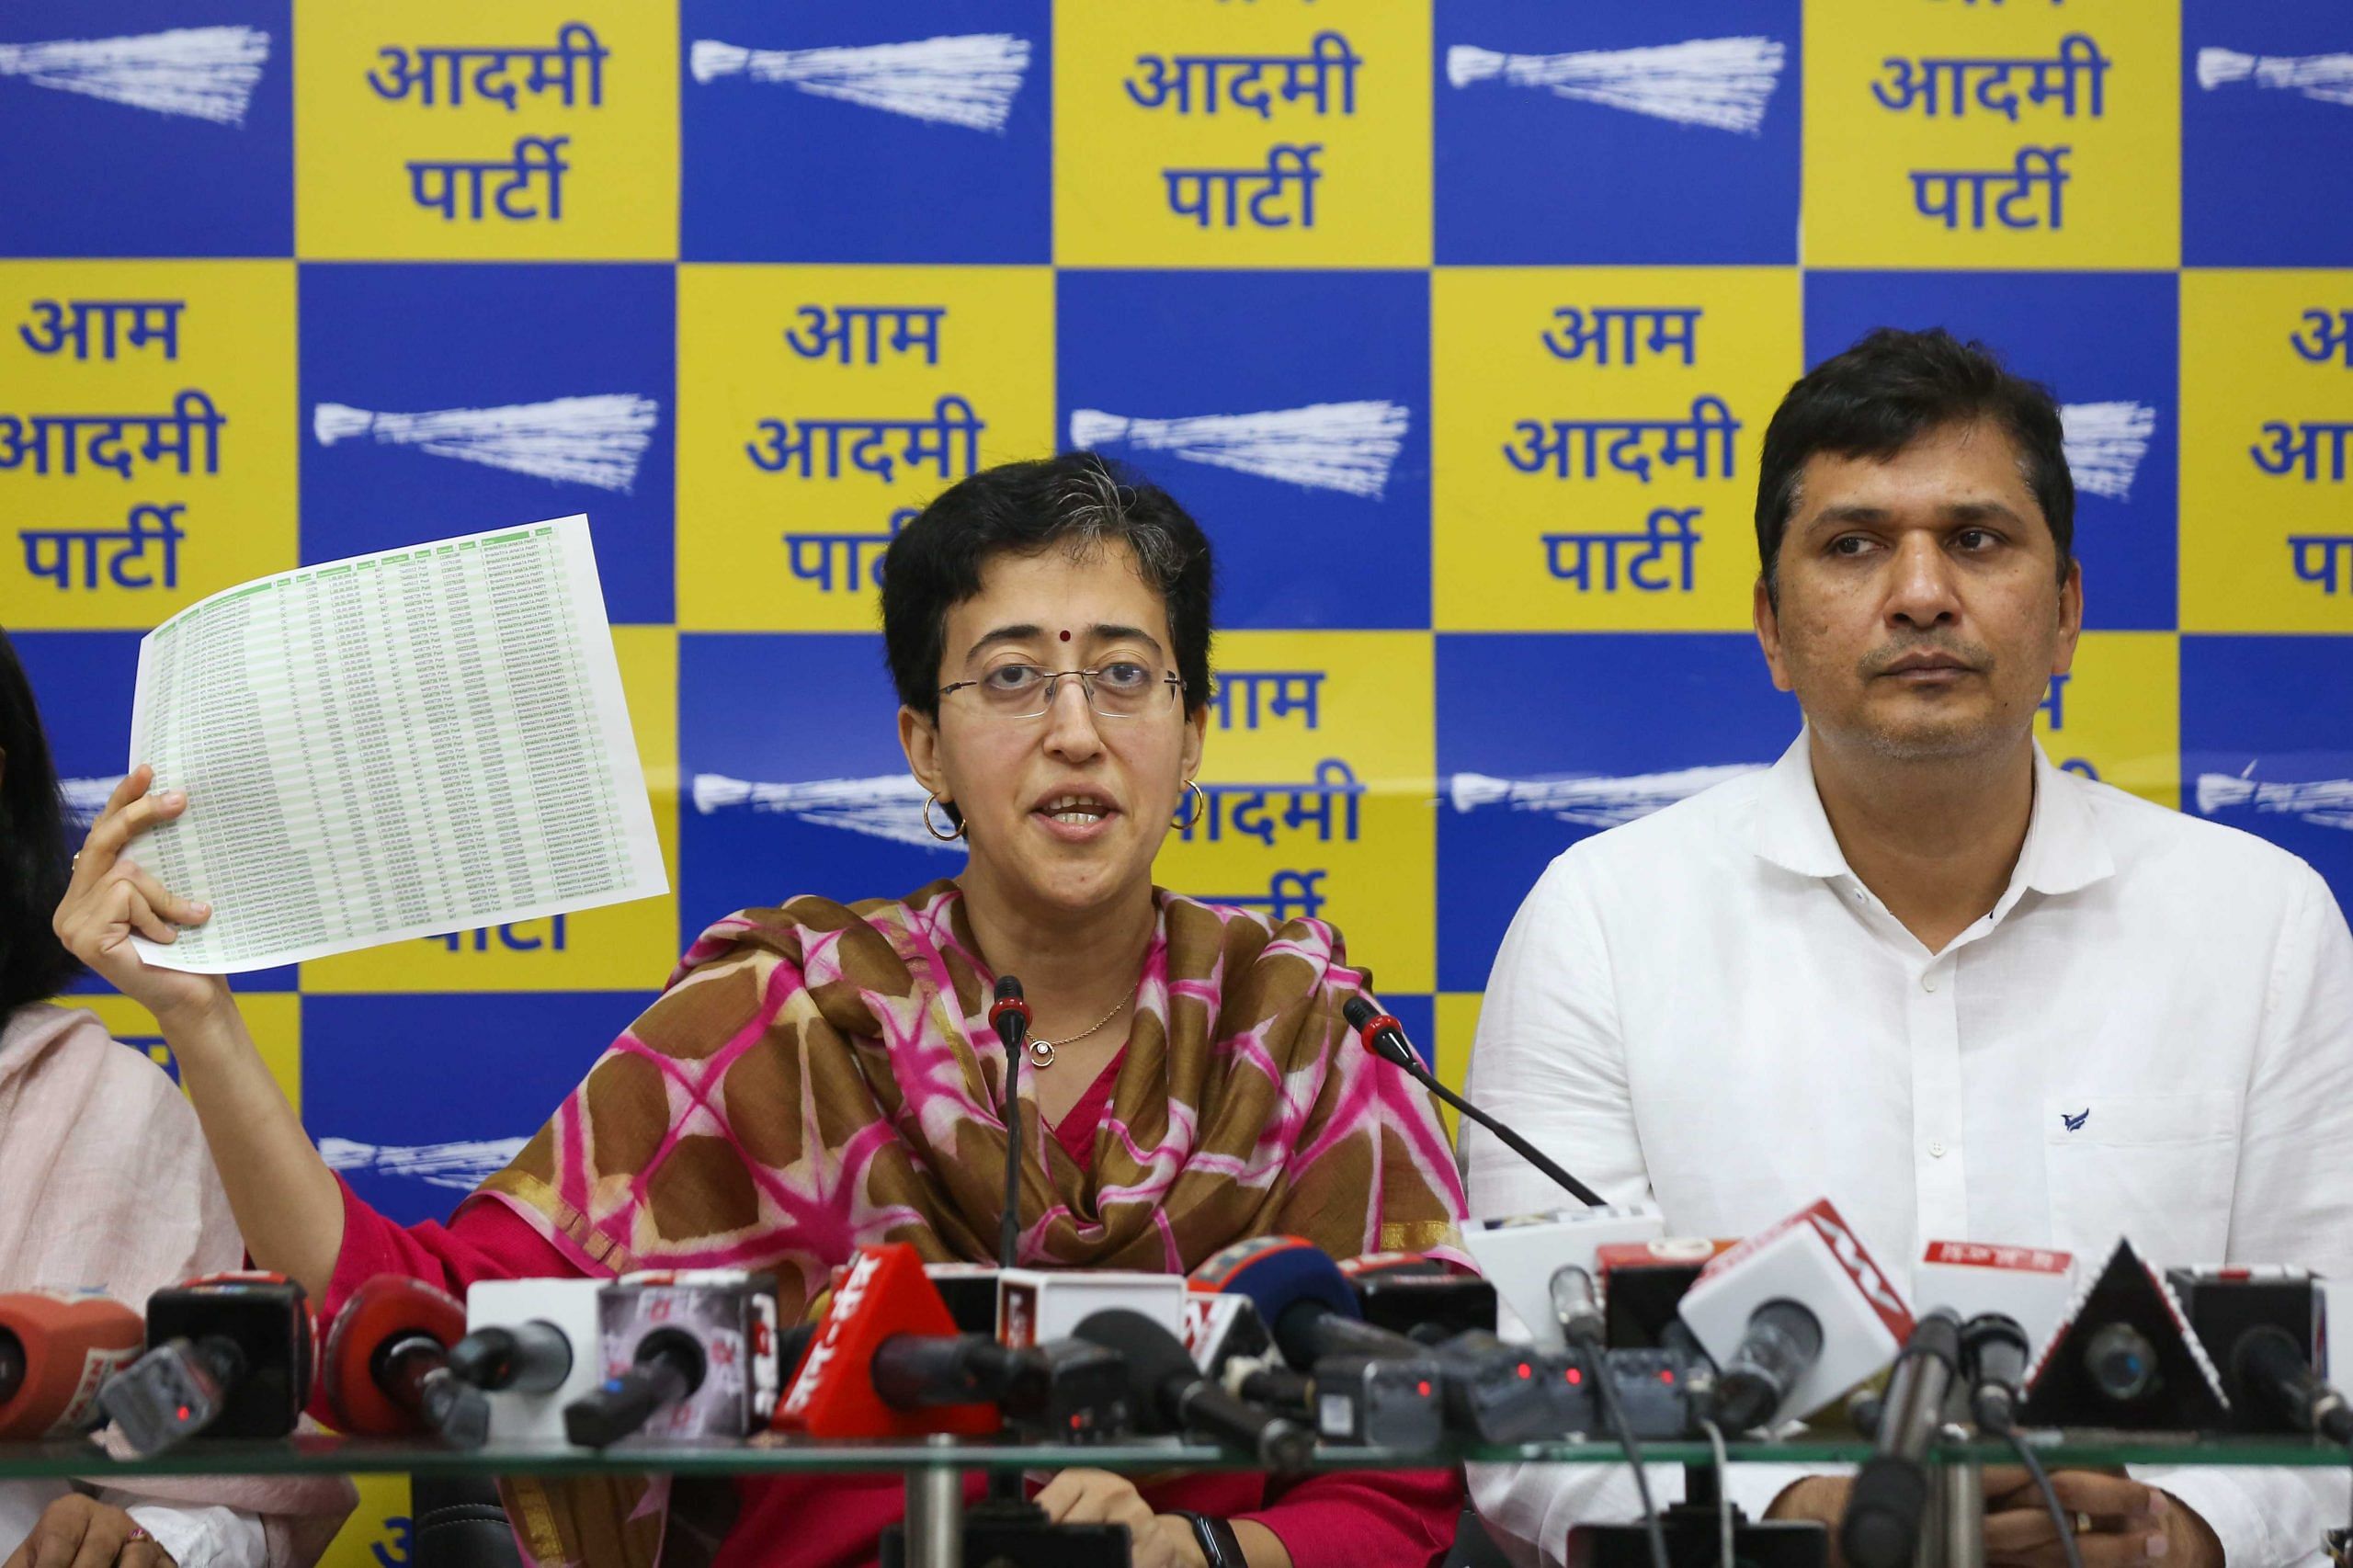 AAP leaders Atishi Marlena and Saurabh Bhardwaj address a press conference at the AAP office in New Delhi on Saturday | Suraj Singh Bisht | ThePrint